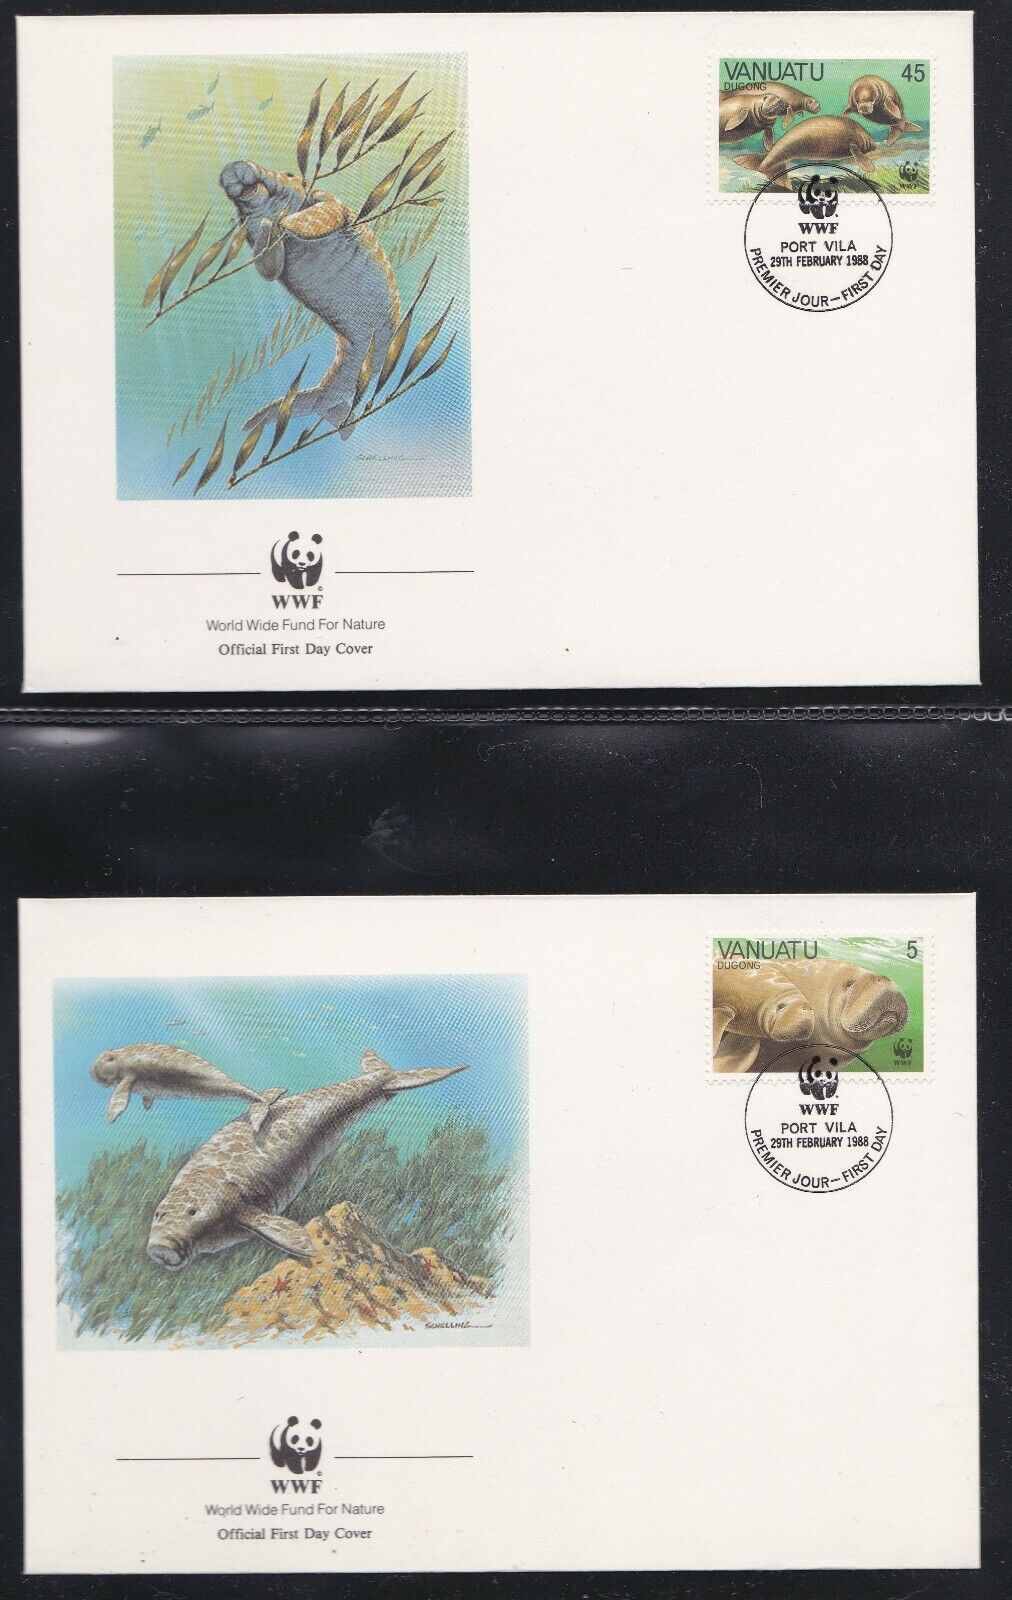 VANUATU 1988 FIRST Large special price DAY Finally popular brand COVER WORLD DUGONGS FUND WWF WILDLIFE